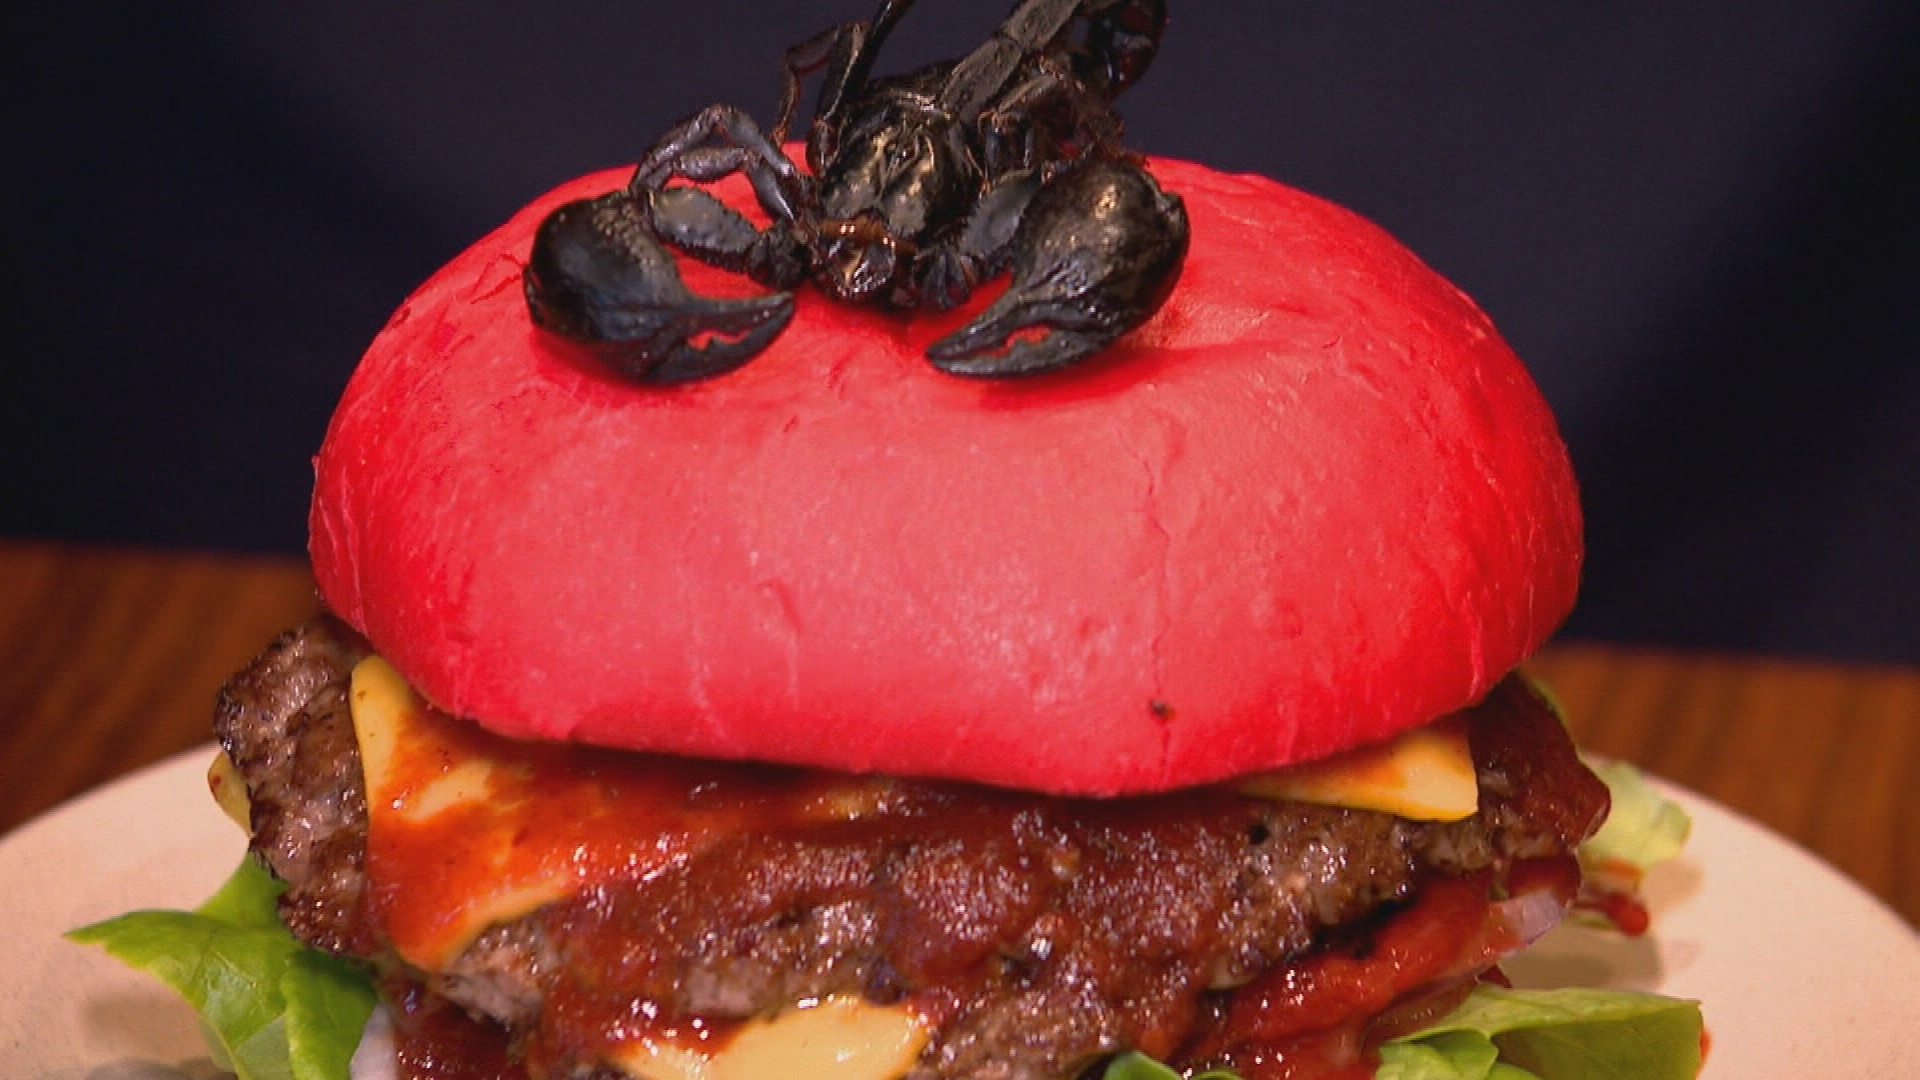 Our ‘hottest burger’ comes with a scorpion and requires a waiver